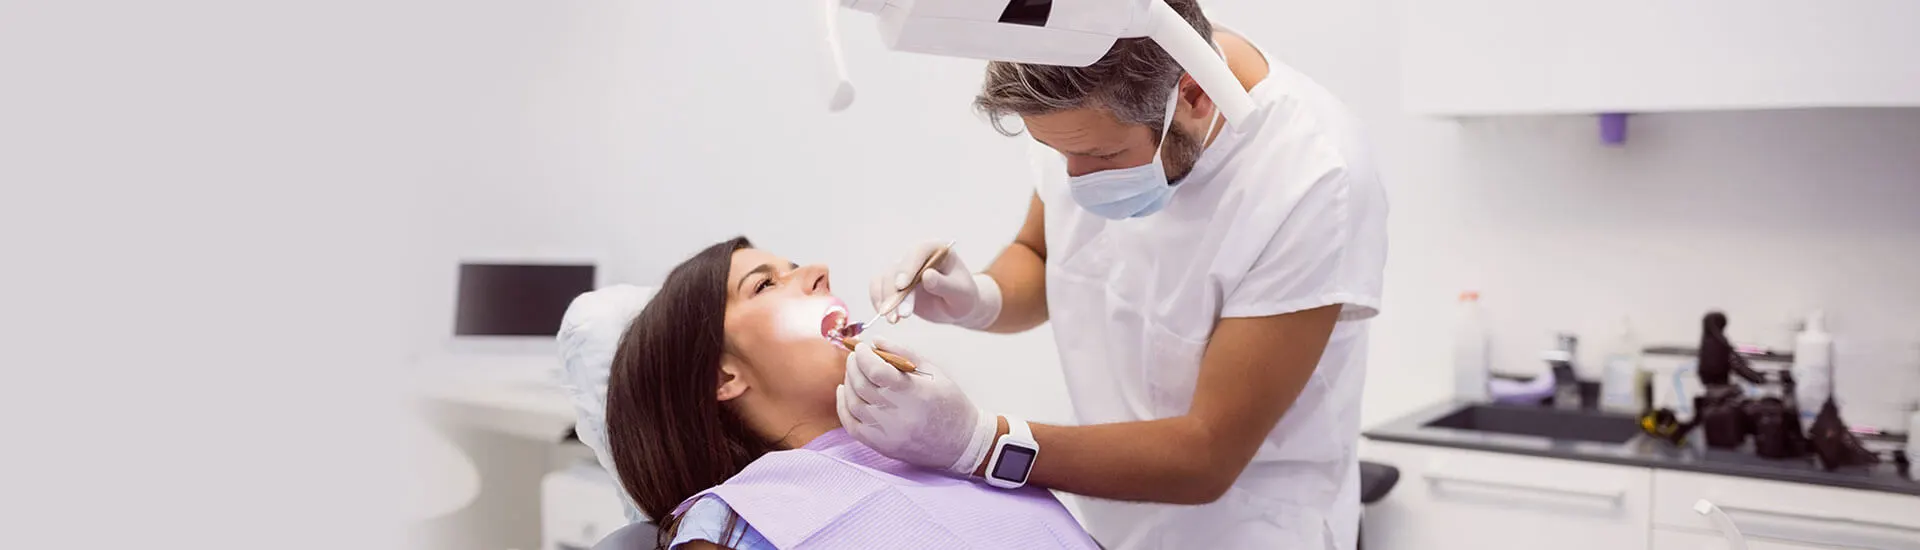 Root Canal Treatment Procedure, Benefits & Recovery